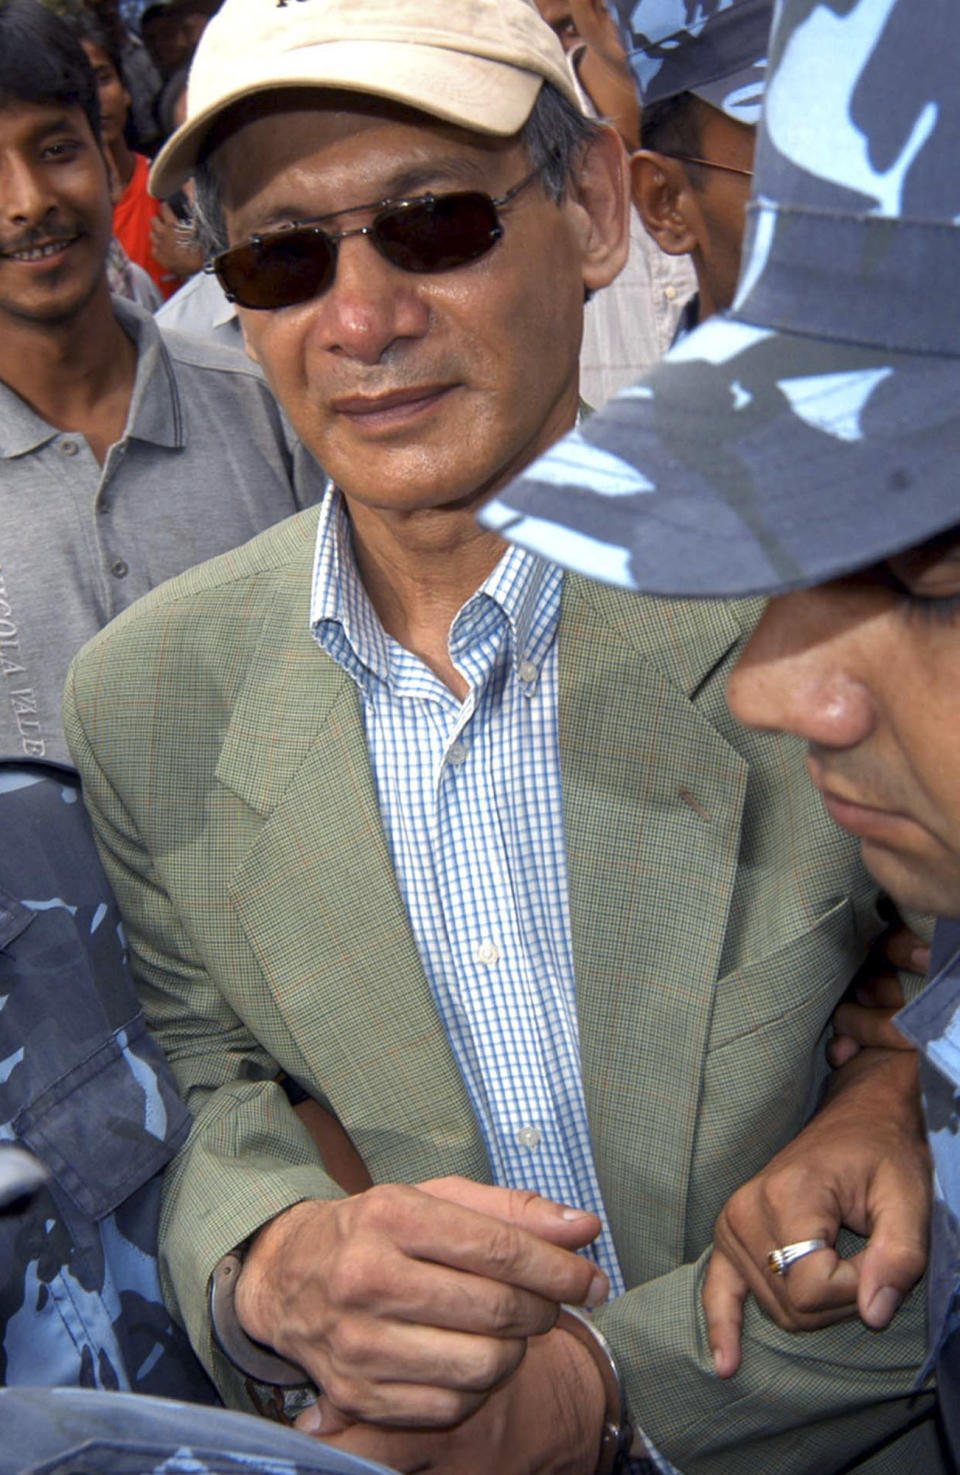 FILE - Police escort convicted French serial killer Charles Sobhraj from court in Katmandu, Nepal on Aug. 12, 2004. Confessed serial killer Sobhraj, who was convicted and sentenced to life in prison in Nepal, was ordered Wednesday, Dec. 21, 2022, to be released because of poor health, good behavior and having already served most of his sentence. (AP Photo/Binod Joshi, File)